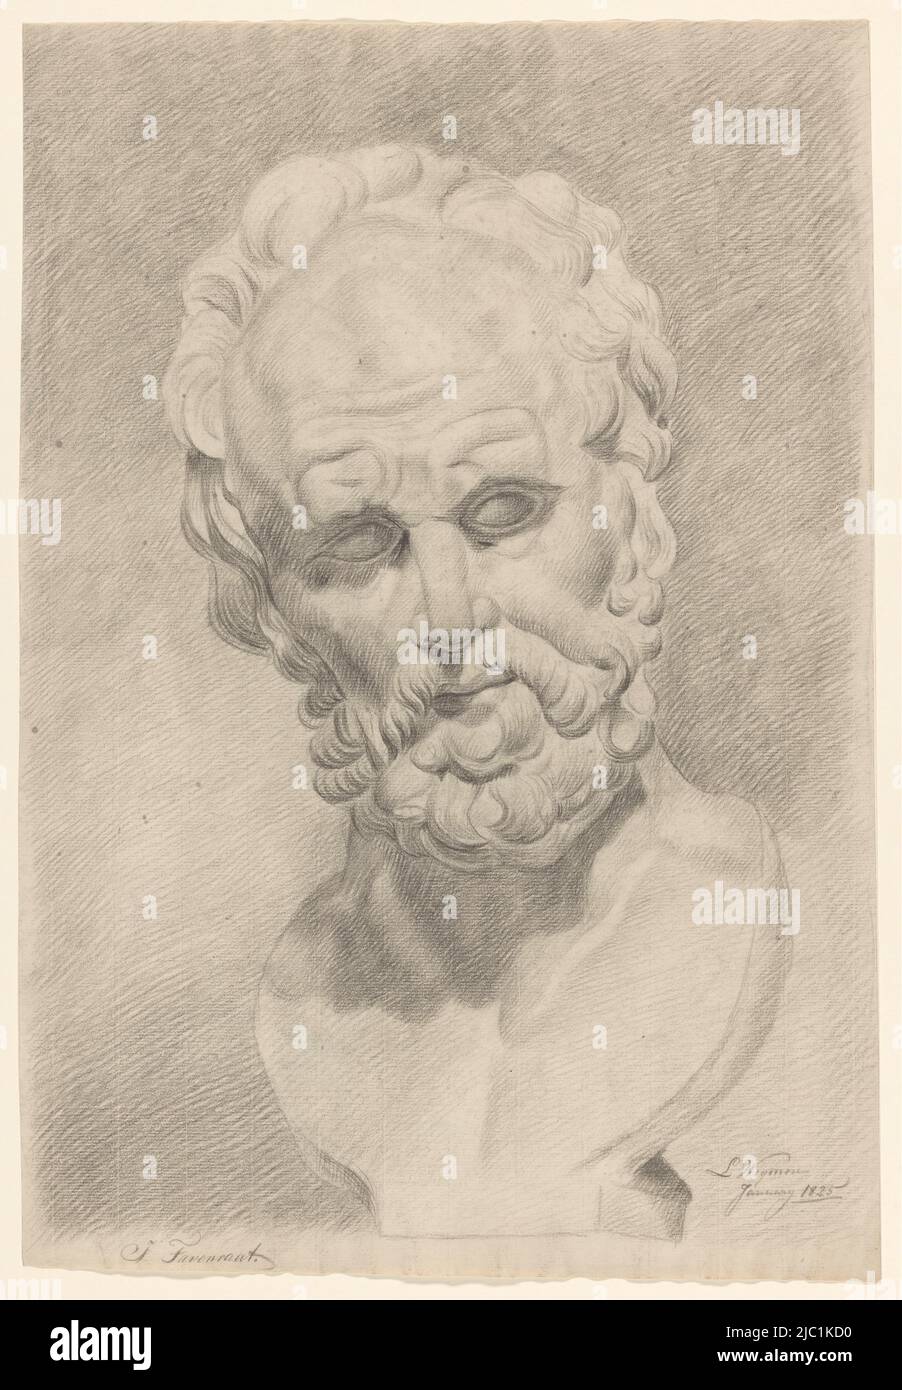 Plaster of an antique bust of a man with beard, draughtsman: Johannes Tavenraat, anonymous, Jan-1825, paper, h 530 mm × w 362 mm Stock Photo